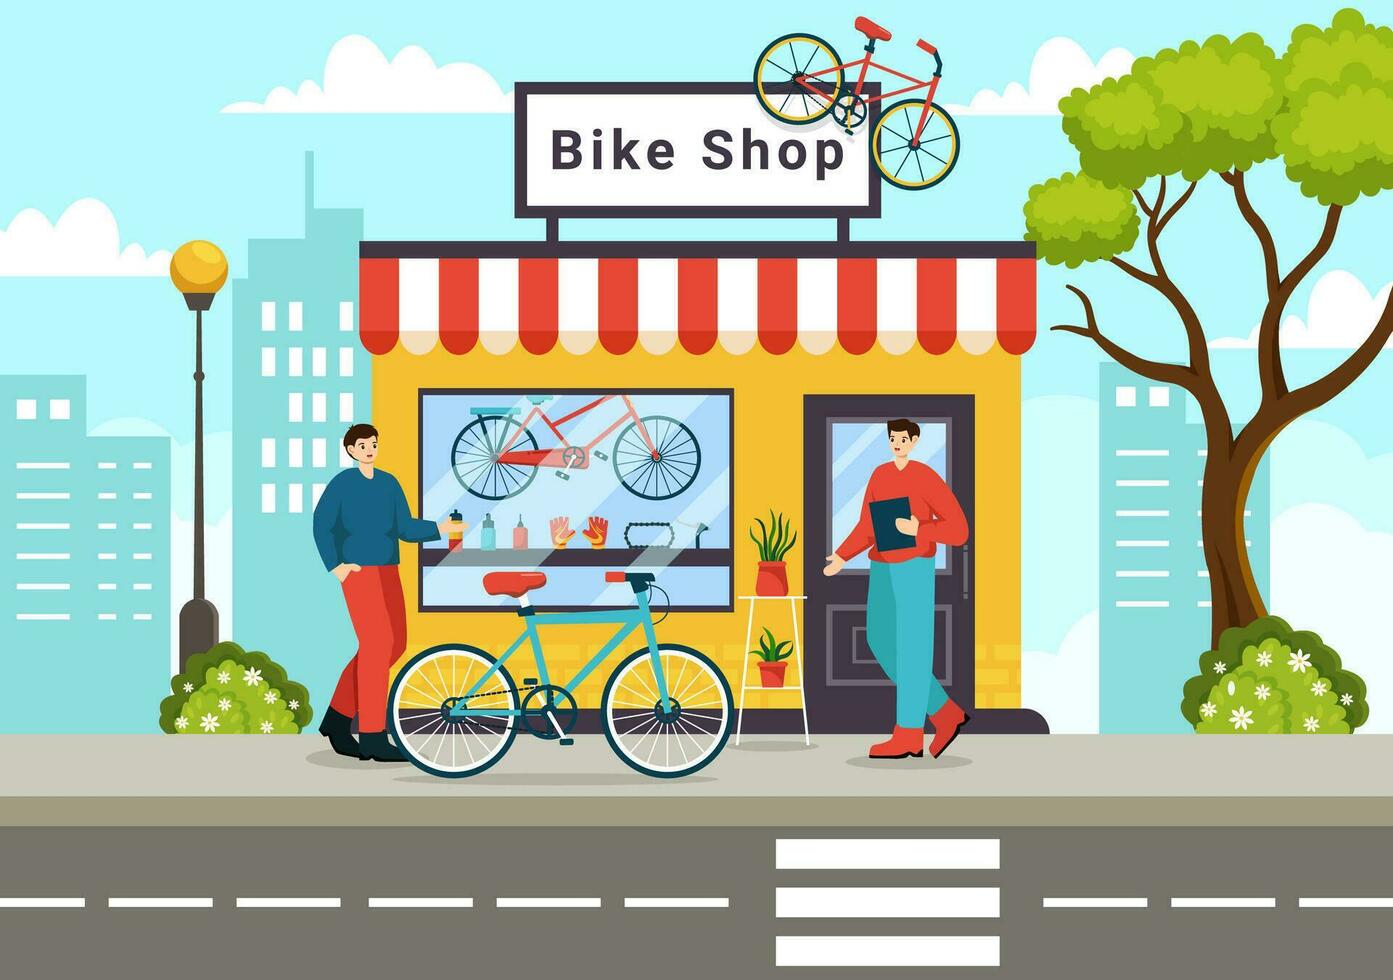 Bike Shop Vector Illustration with Shoppers People Choosing Cycles, Accessories or Gear Equipment for Riding in Flat Cartoon Background Design